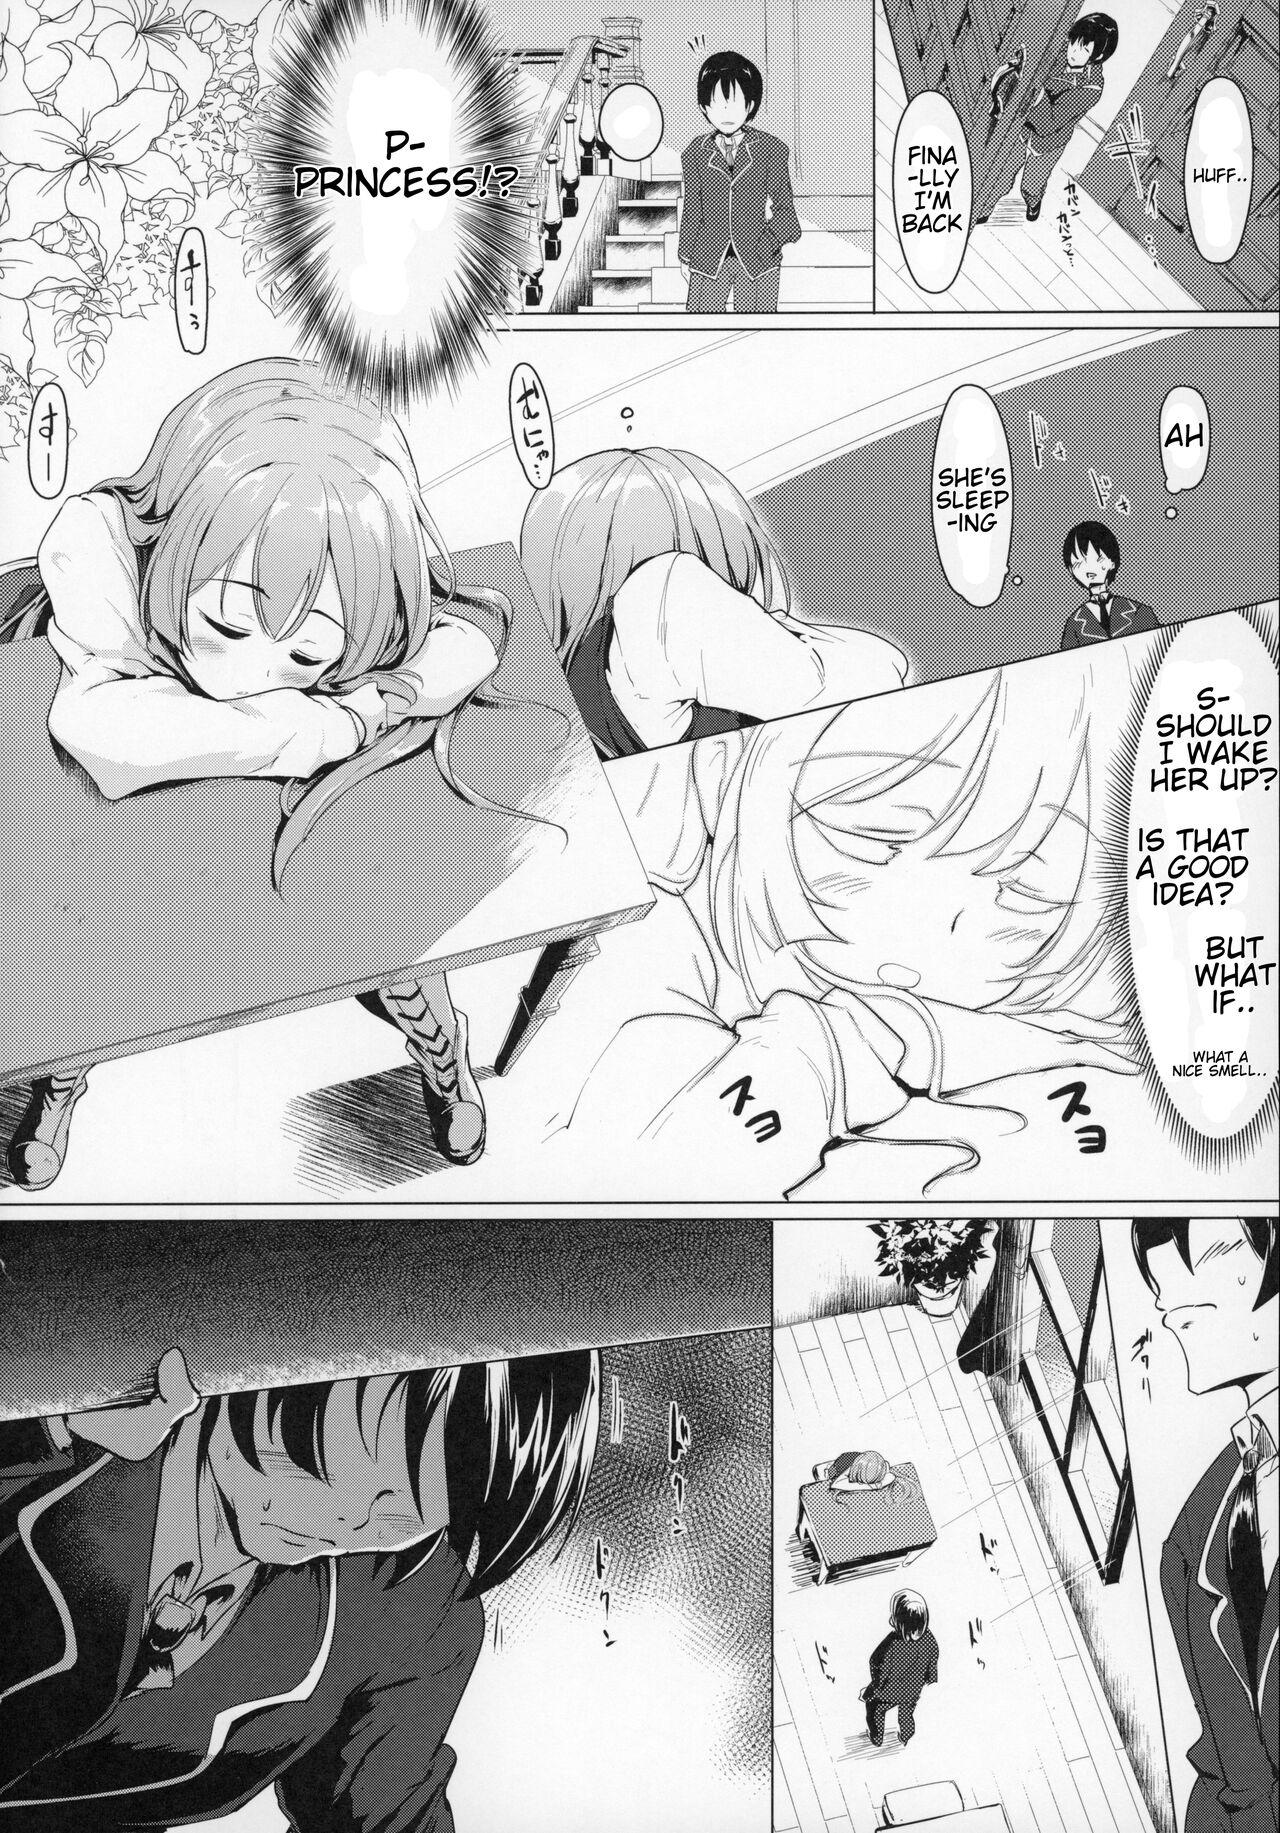 Doggystyle There's No Way An Ecchi Event Will Happen Between Me and the Princess of Manaria Kingdom! - Manaria friends Teenage Sex - Page 7